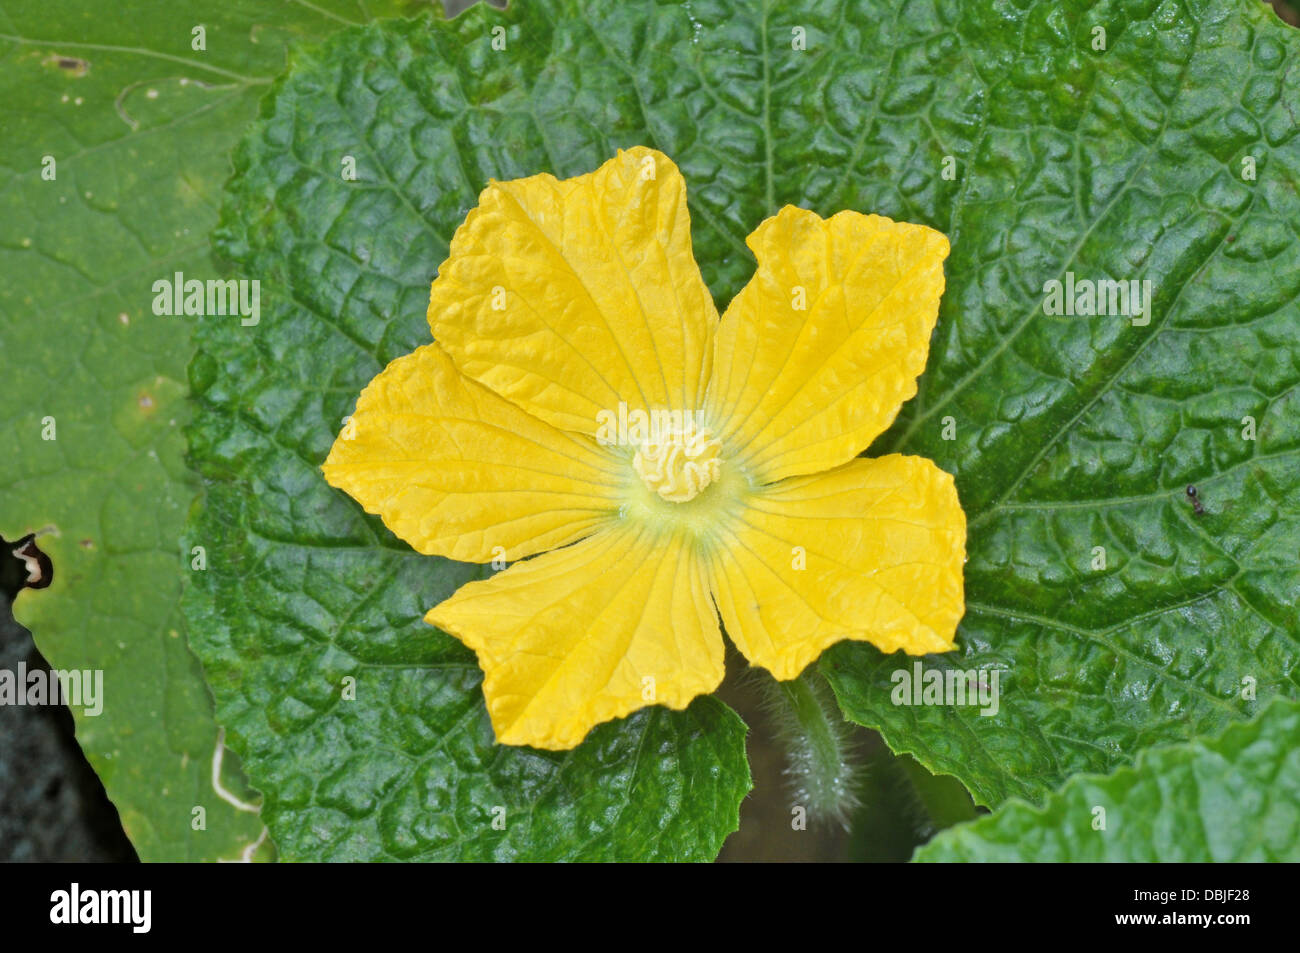 cucumber flower and leaf Stock Photo